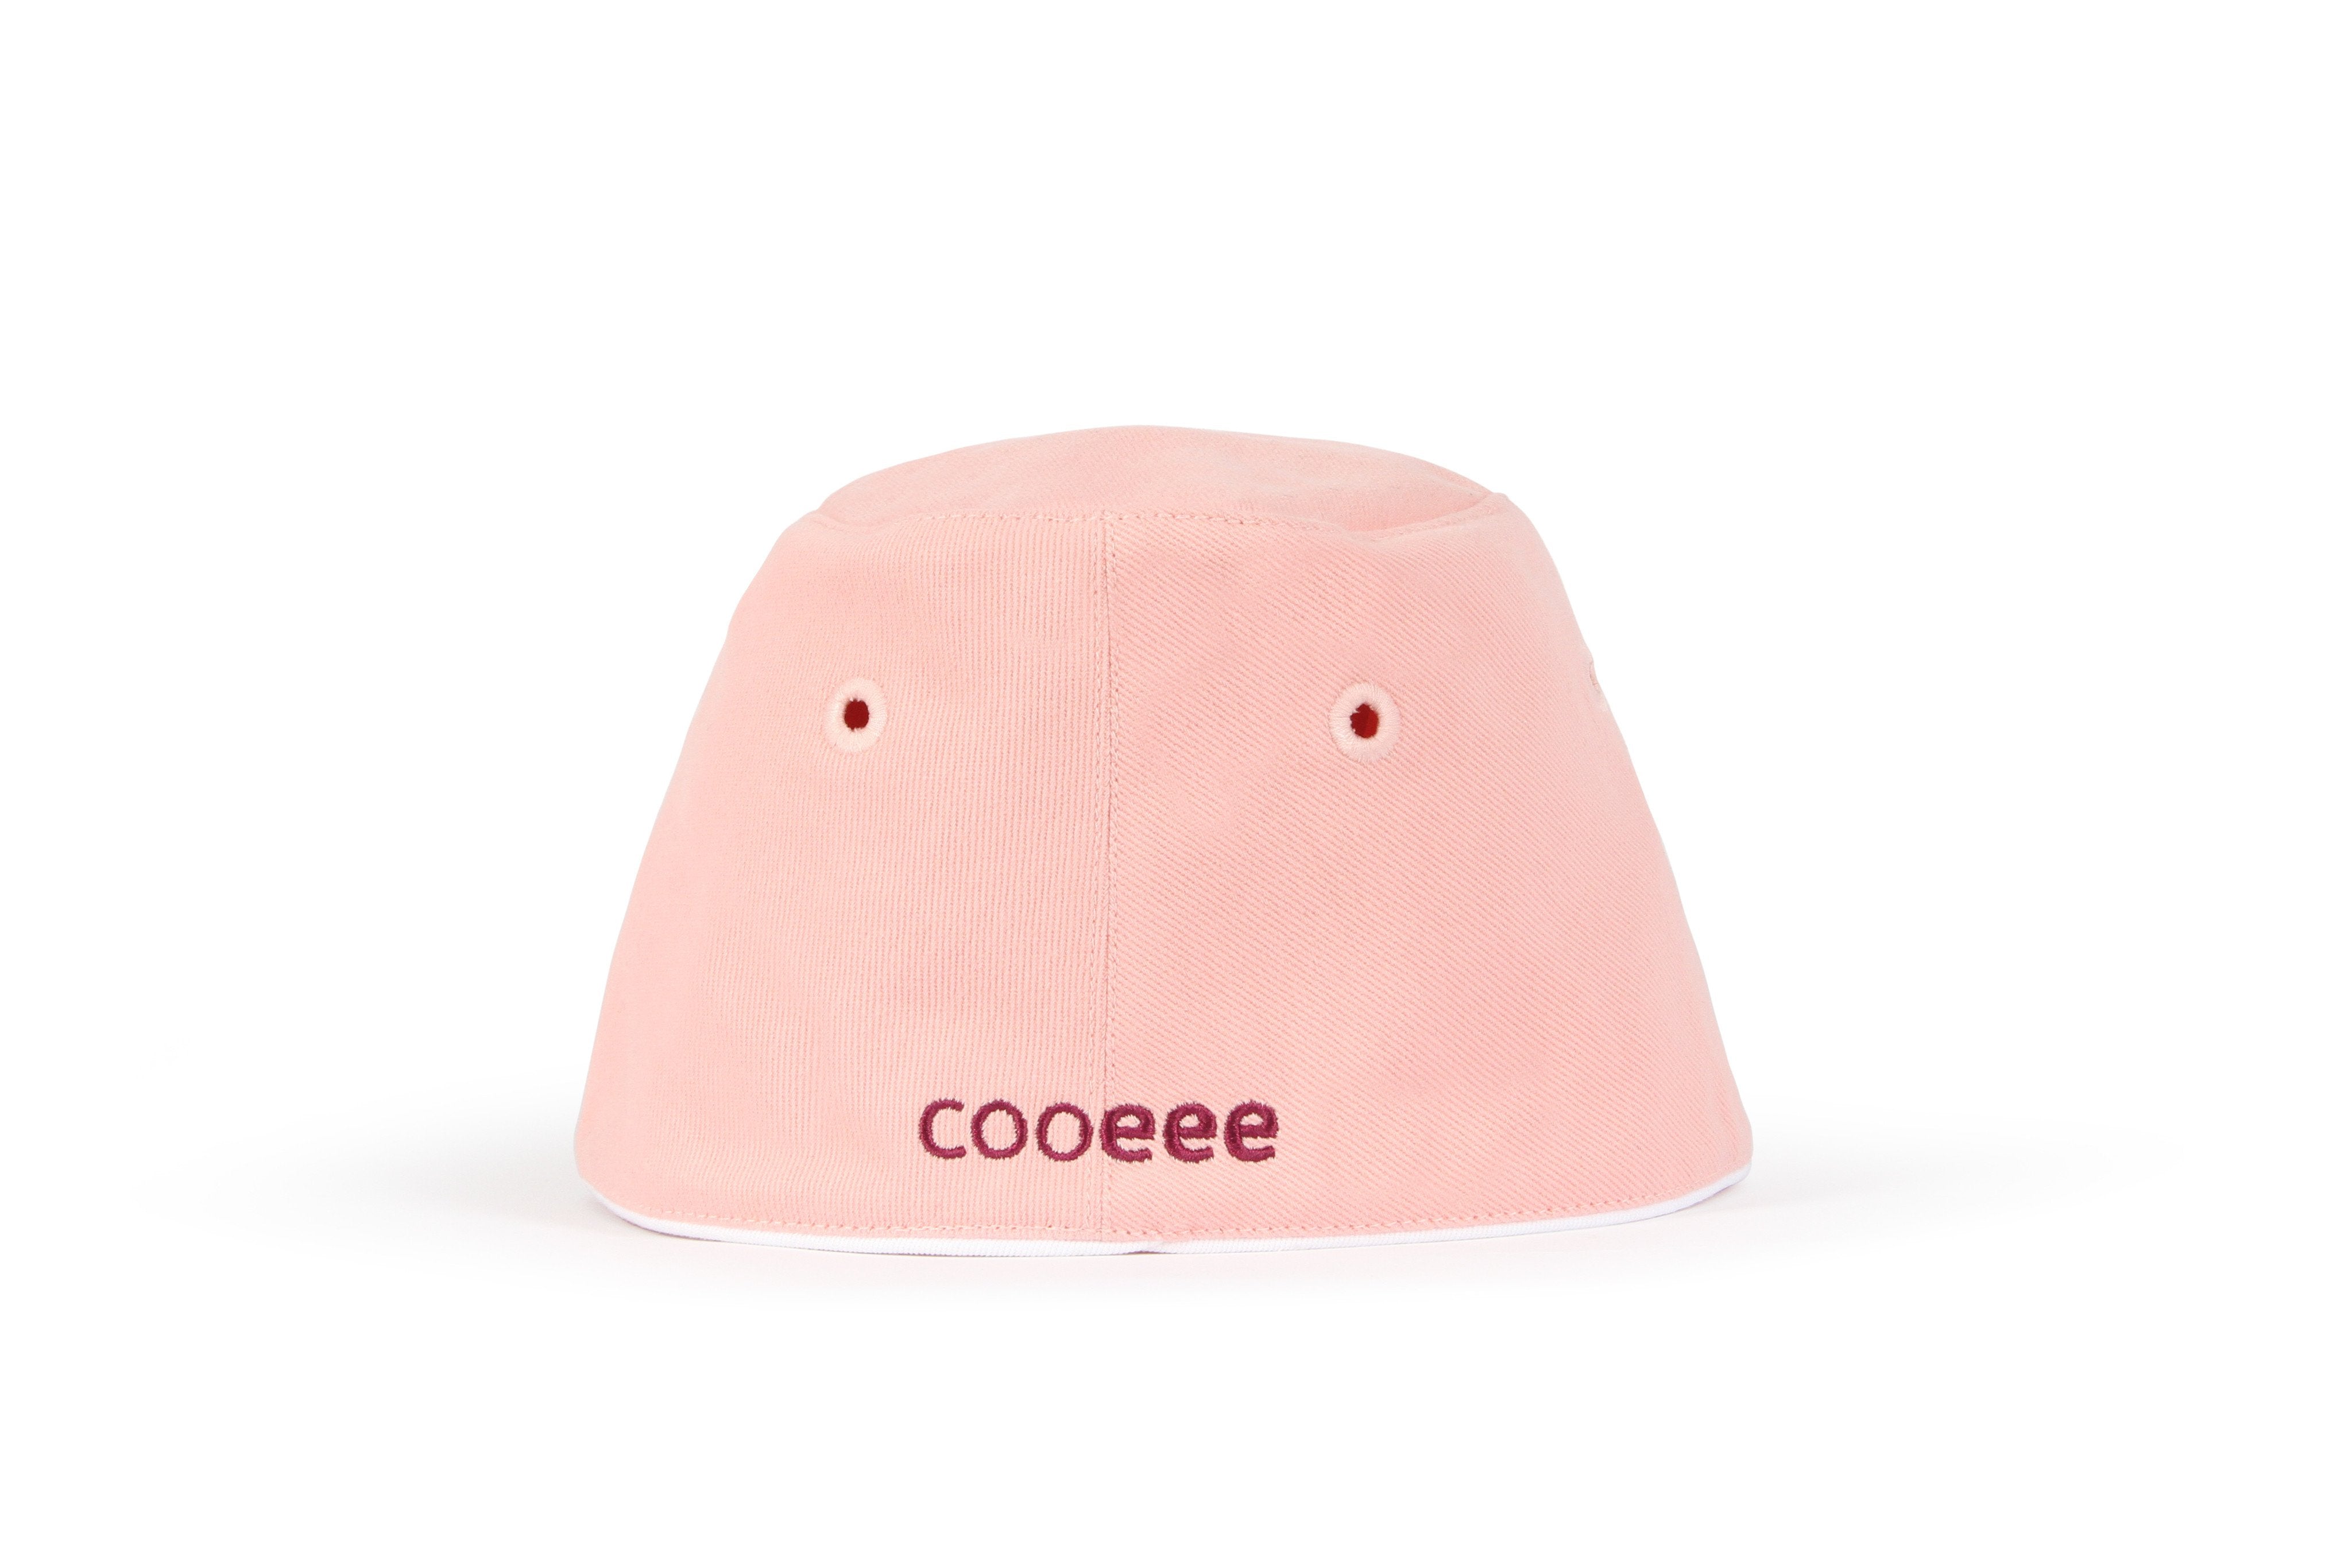 COOEEE Horses Sunglasses Hat Pink and Burgundy with Pink Lenses Back View by Boomerang Baby